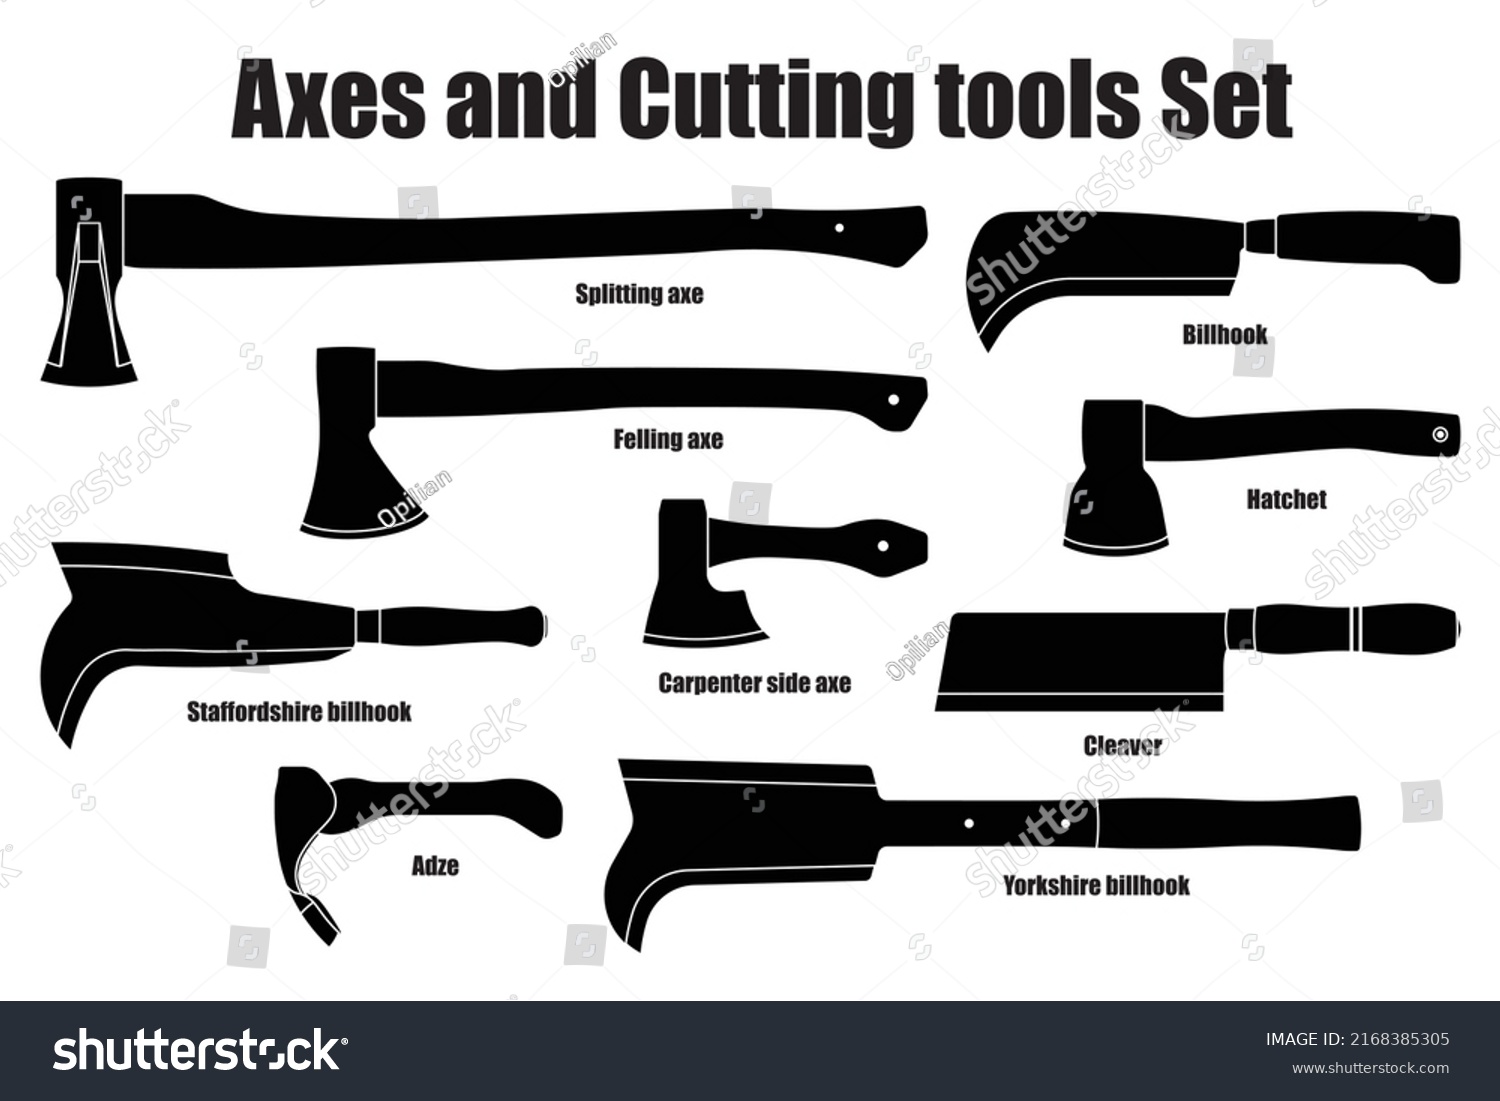 SVG of Different types of Axes and Cutting tools set isolated silhouette vectors on white background. Consists of Axe Adze Hatchet Billhook and Cleaver. Used for carpenter woodworking forest log. svg